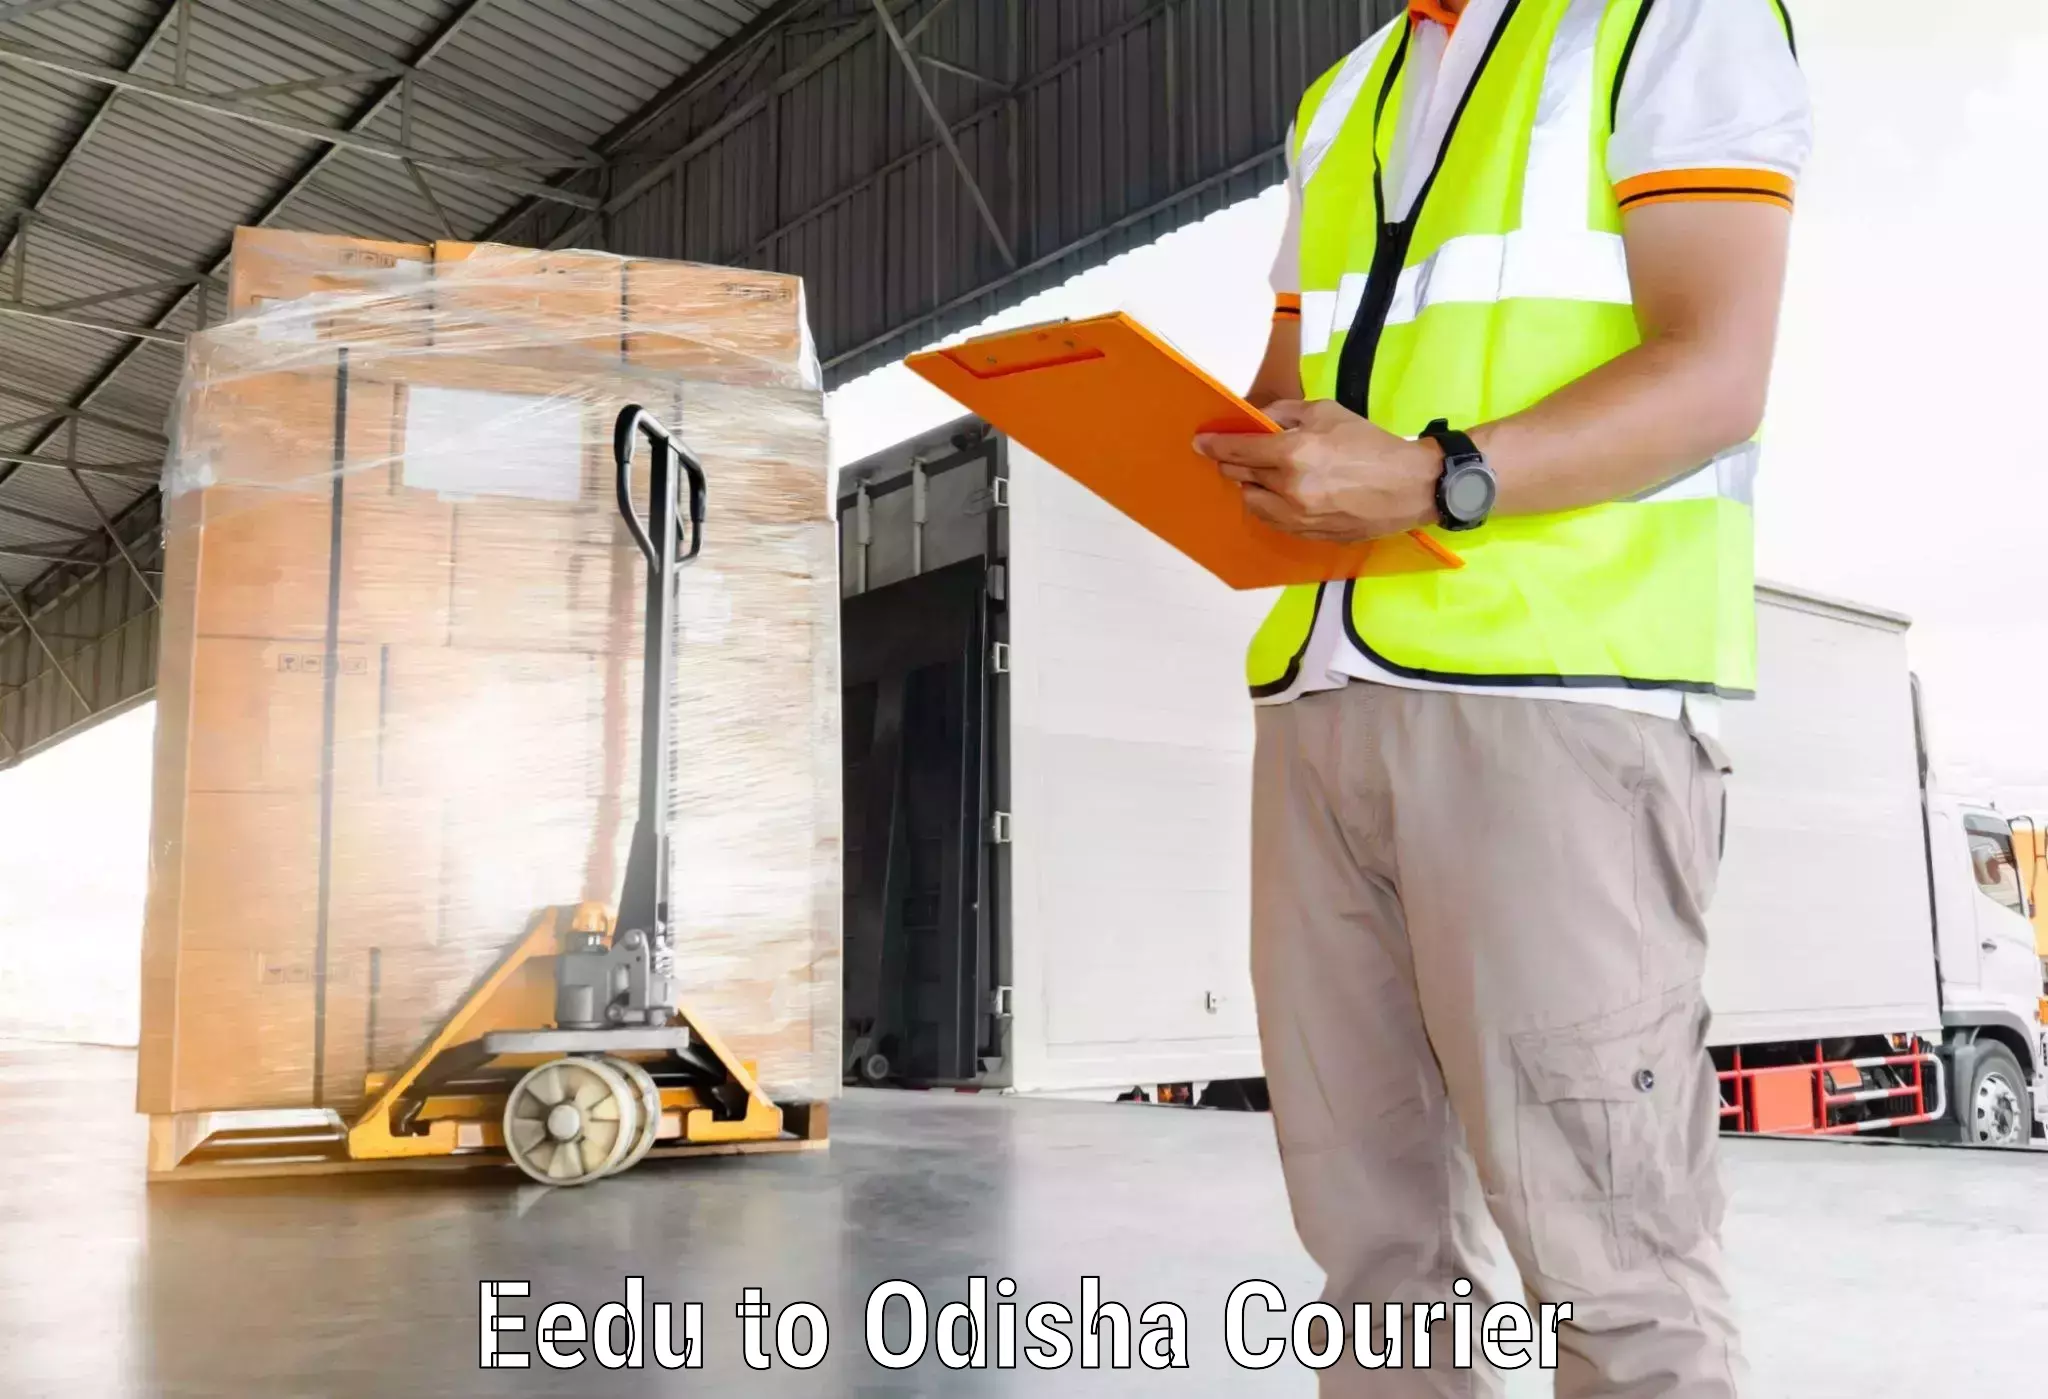 Global courier networks Eedu to Mathili